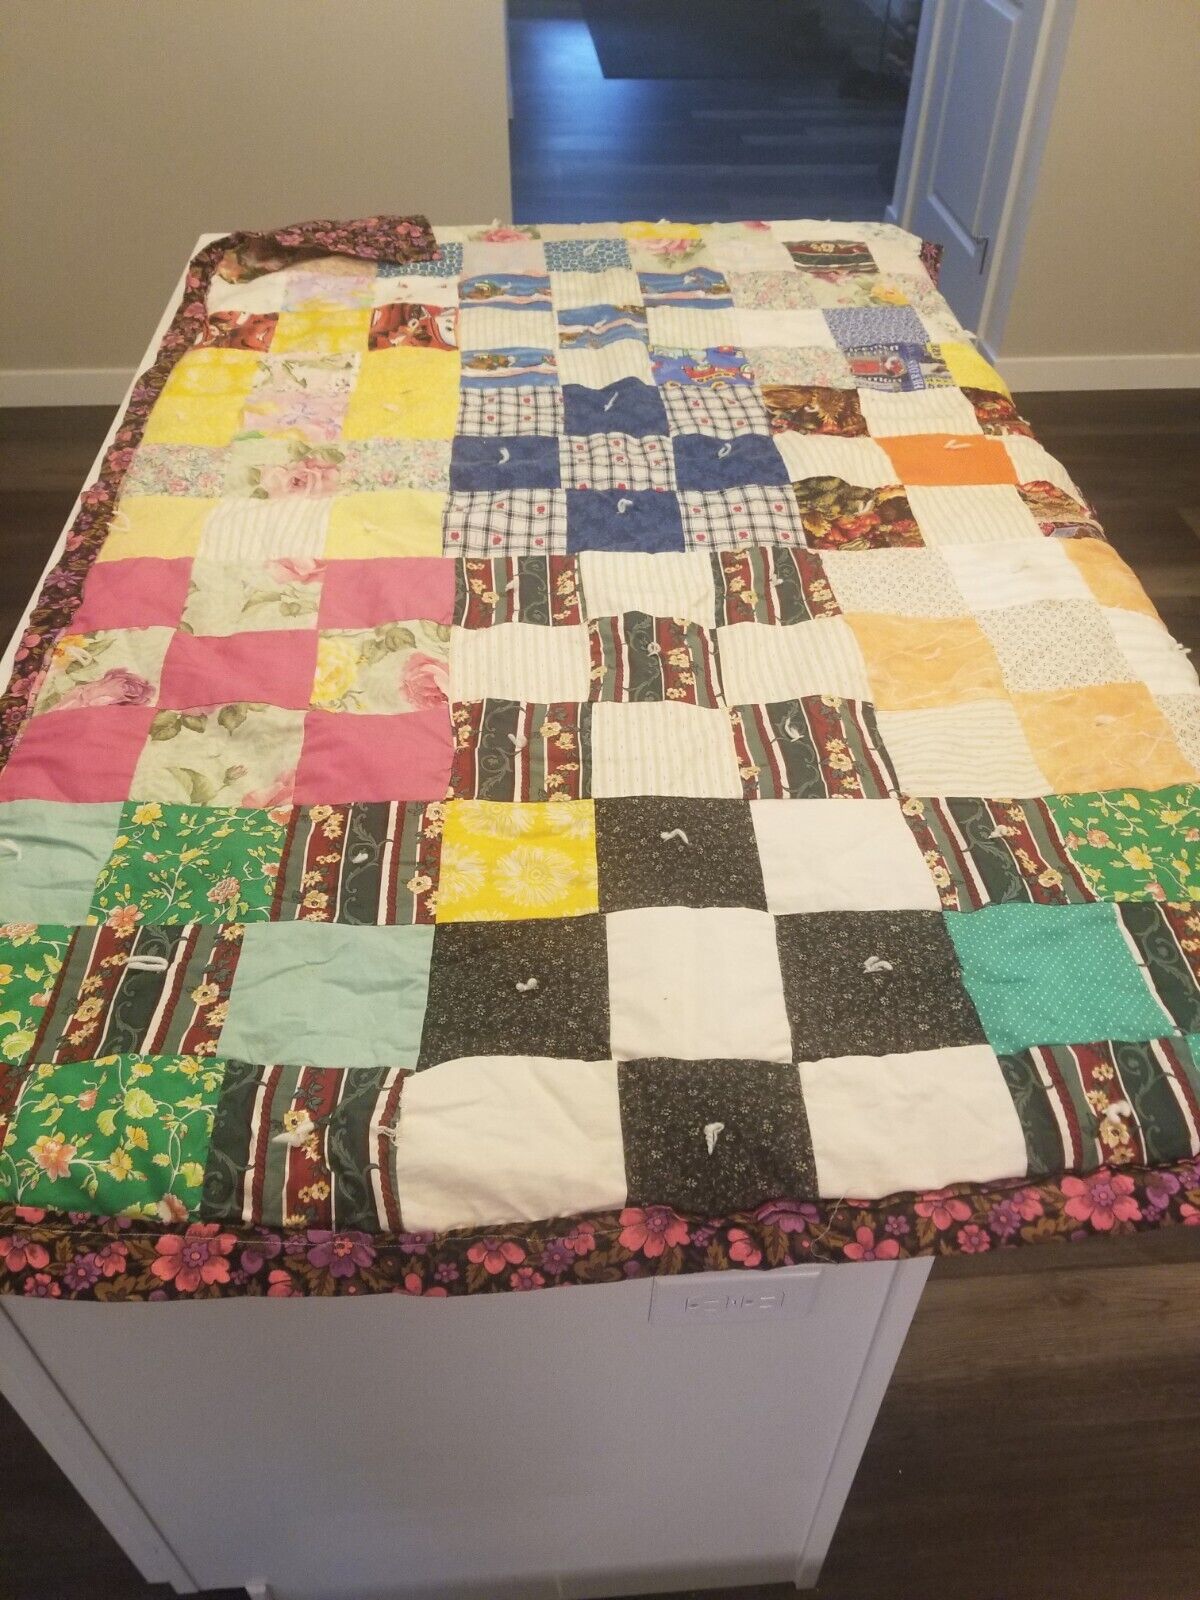 Small Handmade Handtied Childrens Or Lap Quilt - Good - One  Small Repair Needed